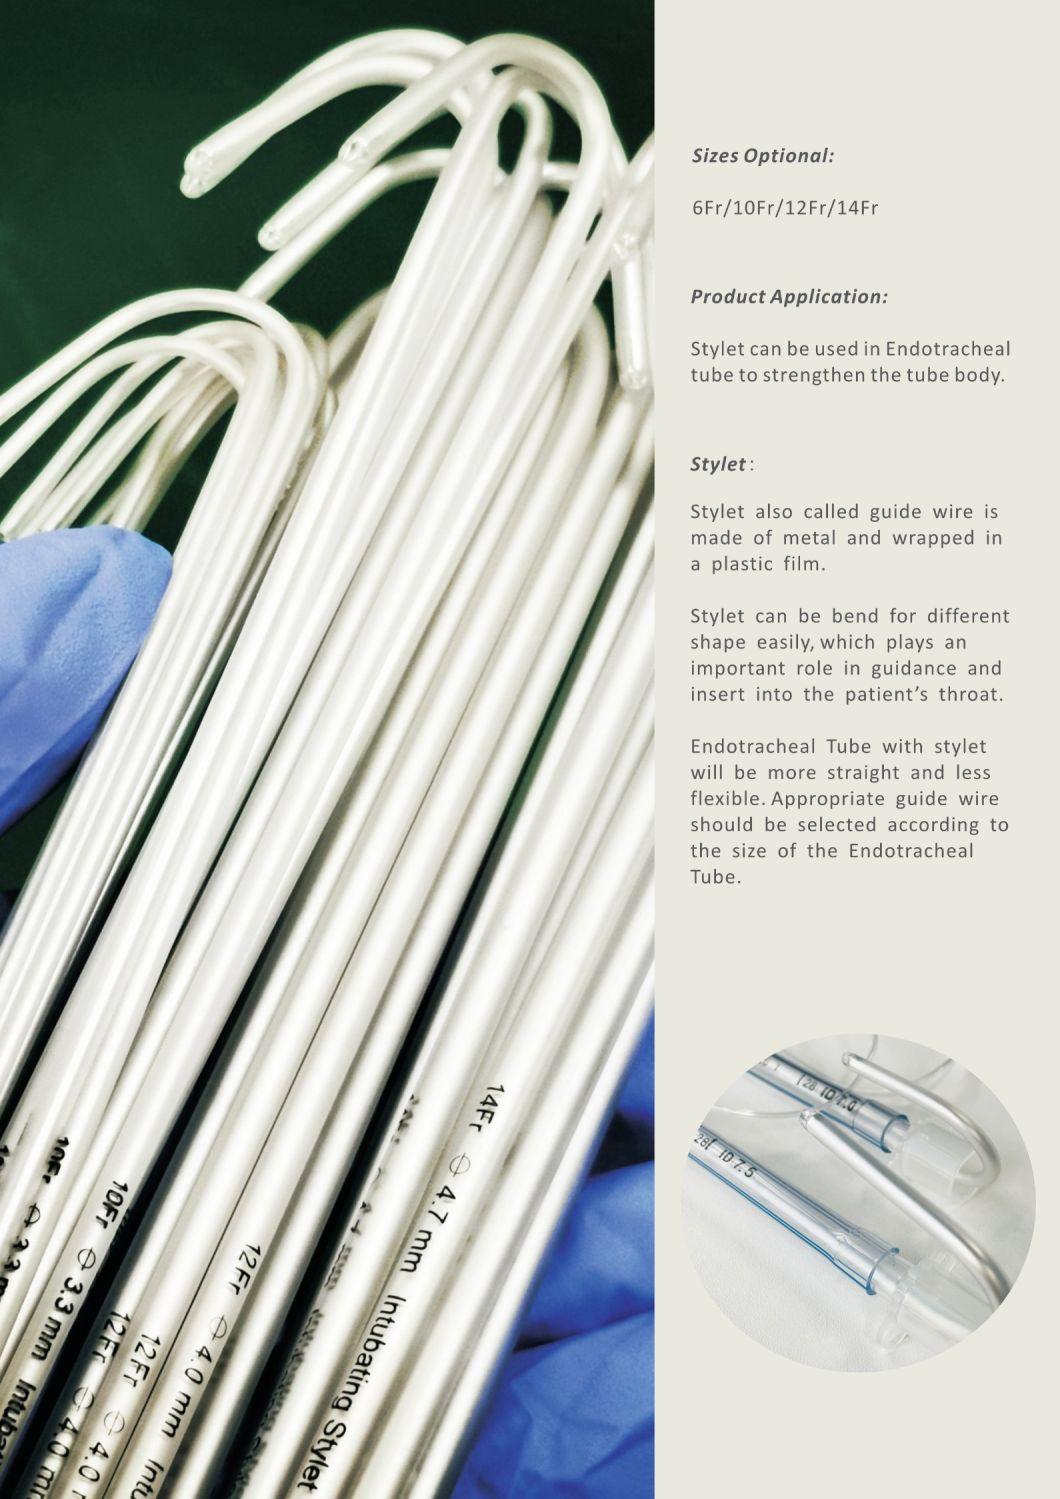 Plastic Stylet for Endotracheal Tube in Surgery Using Size Optional